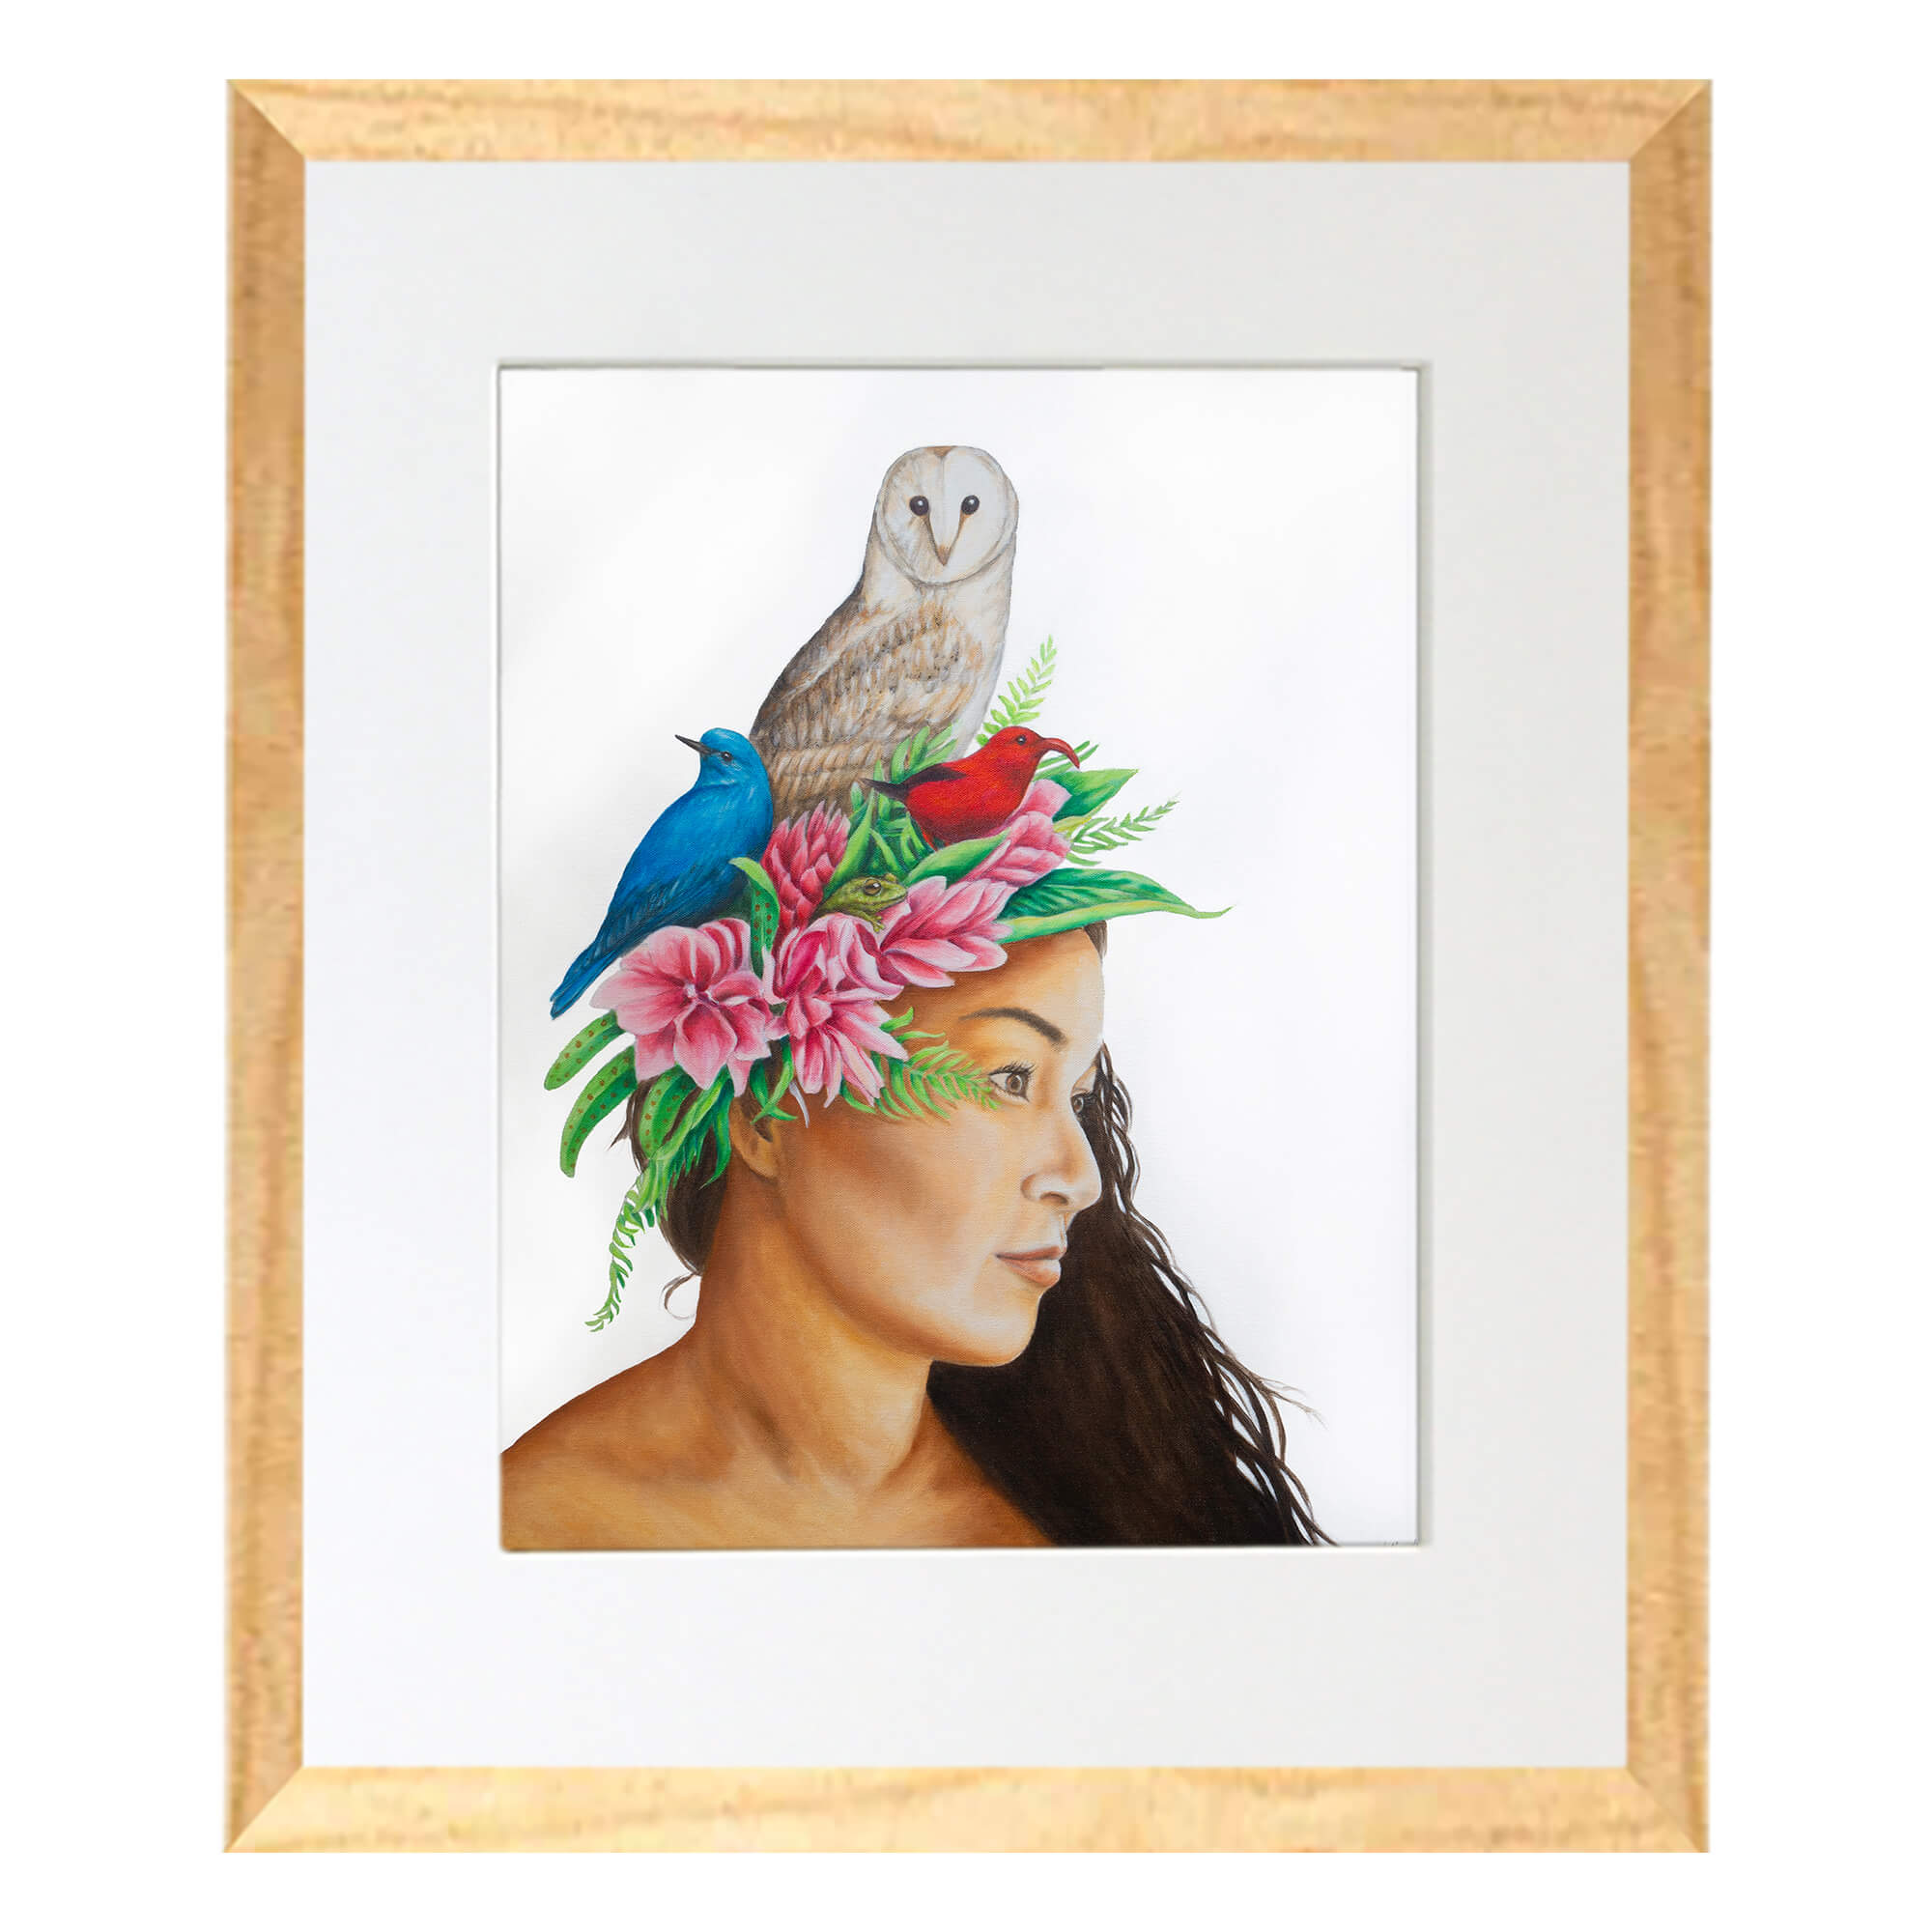 Matted art print with wood frame featuring a woman with brown hair with a flowery veil by hawaii artist Kelly Keane